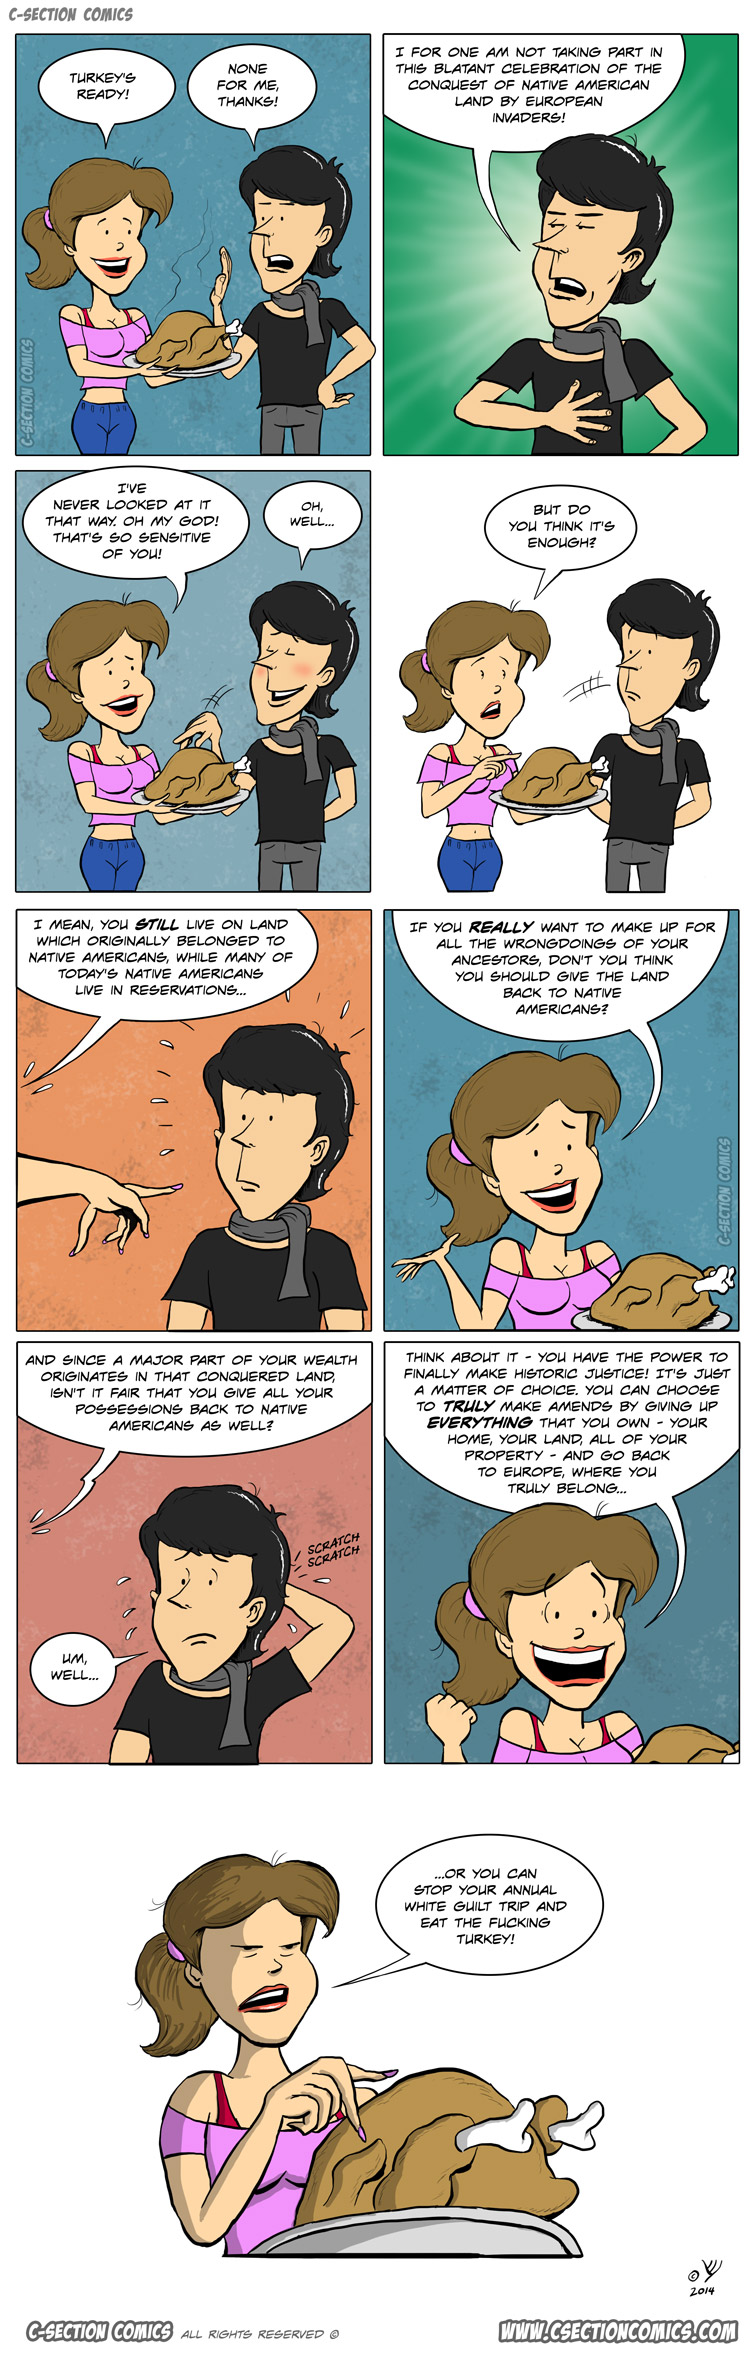 How to Solve the Toughest Thanksgiving Dilemma - Cartoon by C-Section Comics